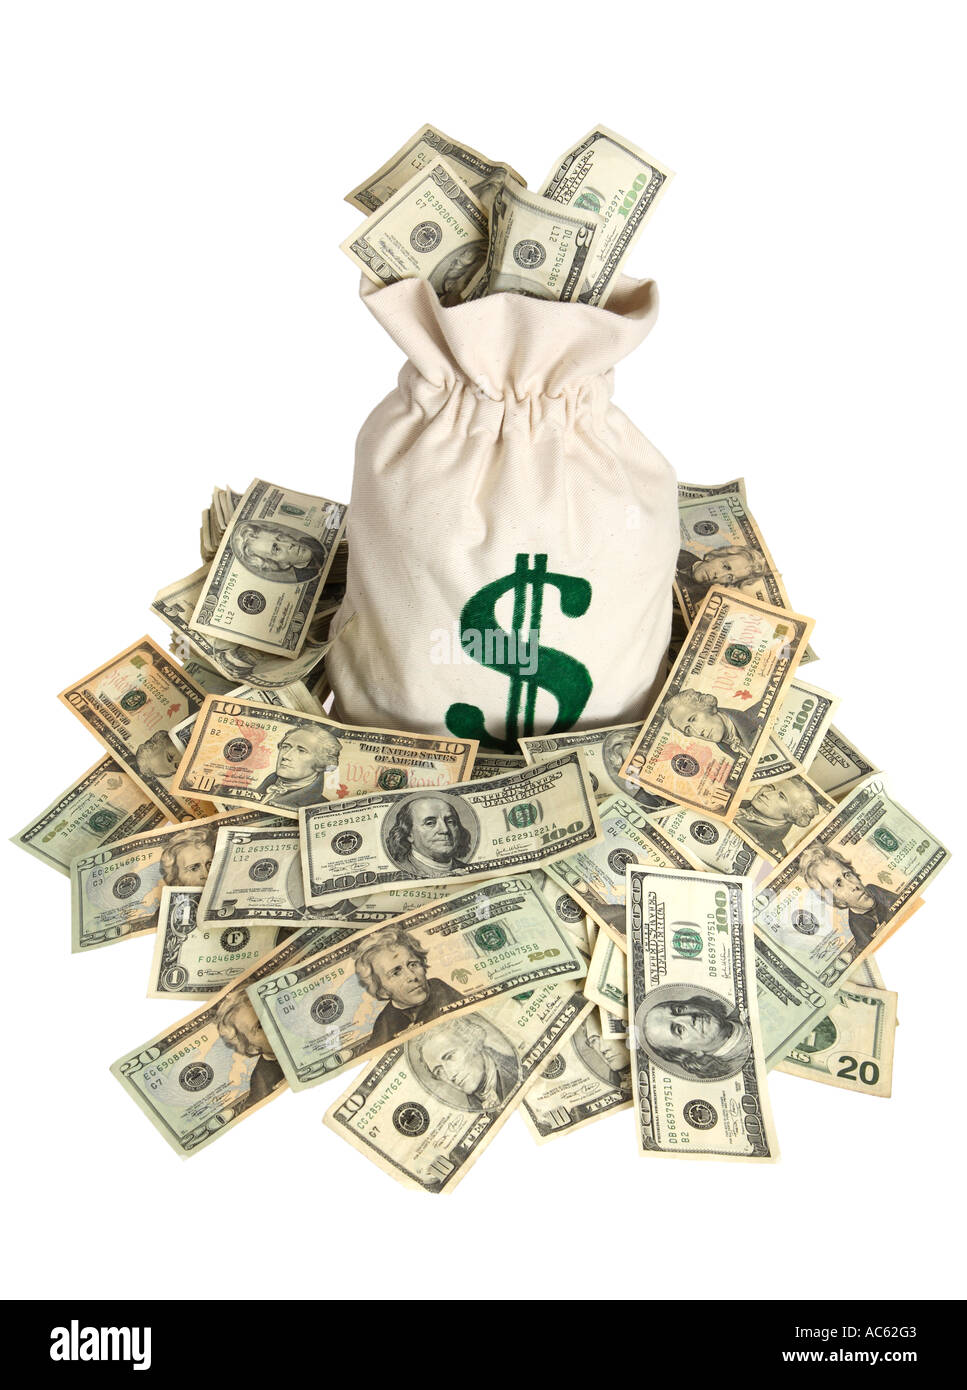 Moneybag and pile of money Stock Photo - Alamy